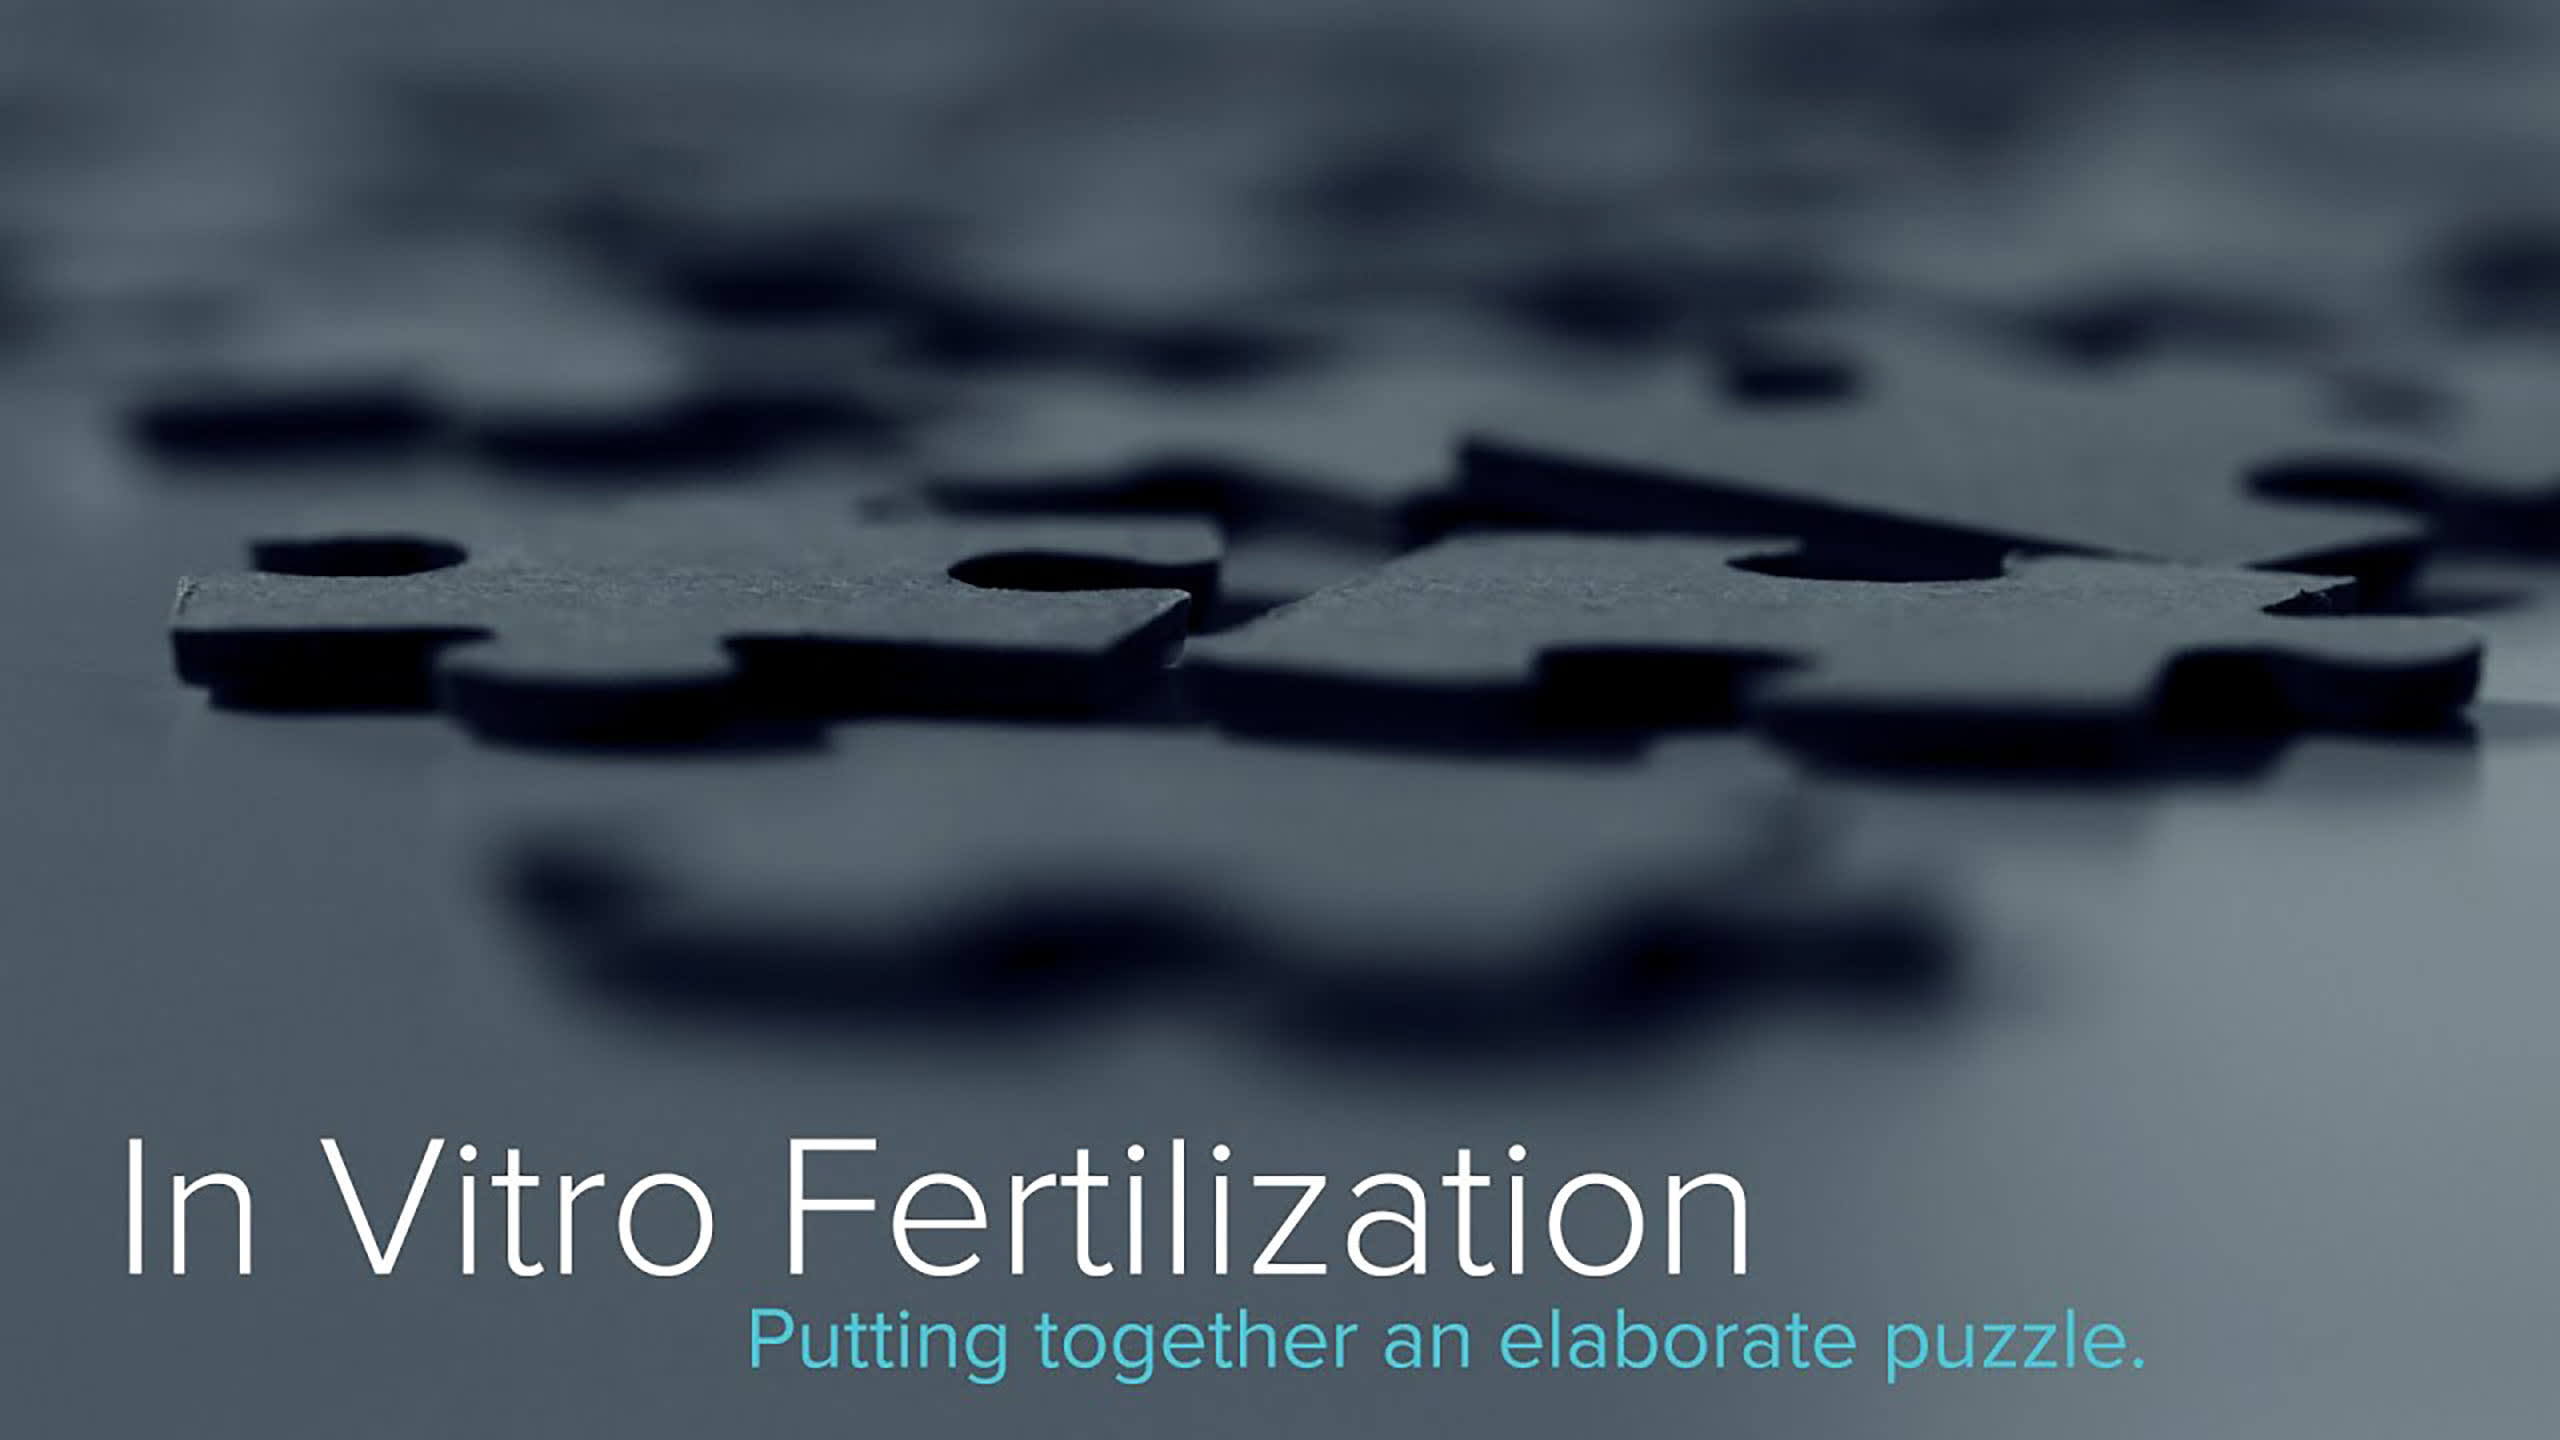 Puzzle pieces in background with title in foreground that reads "In Vitro Fertilization - Putting together an elaborate puzzle"